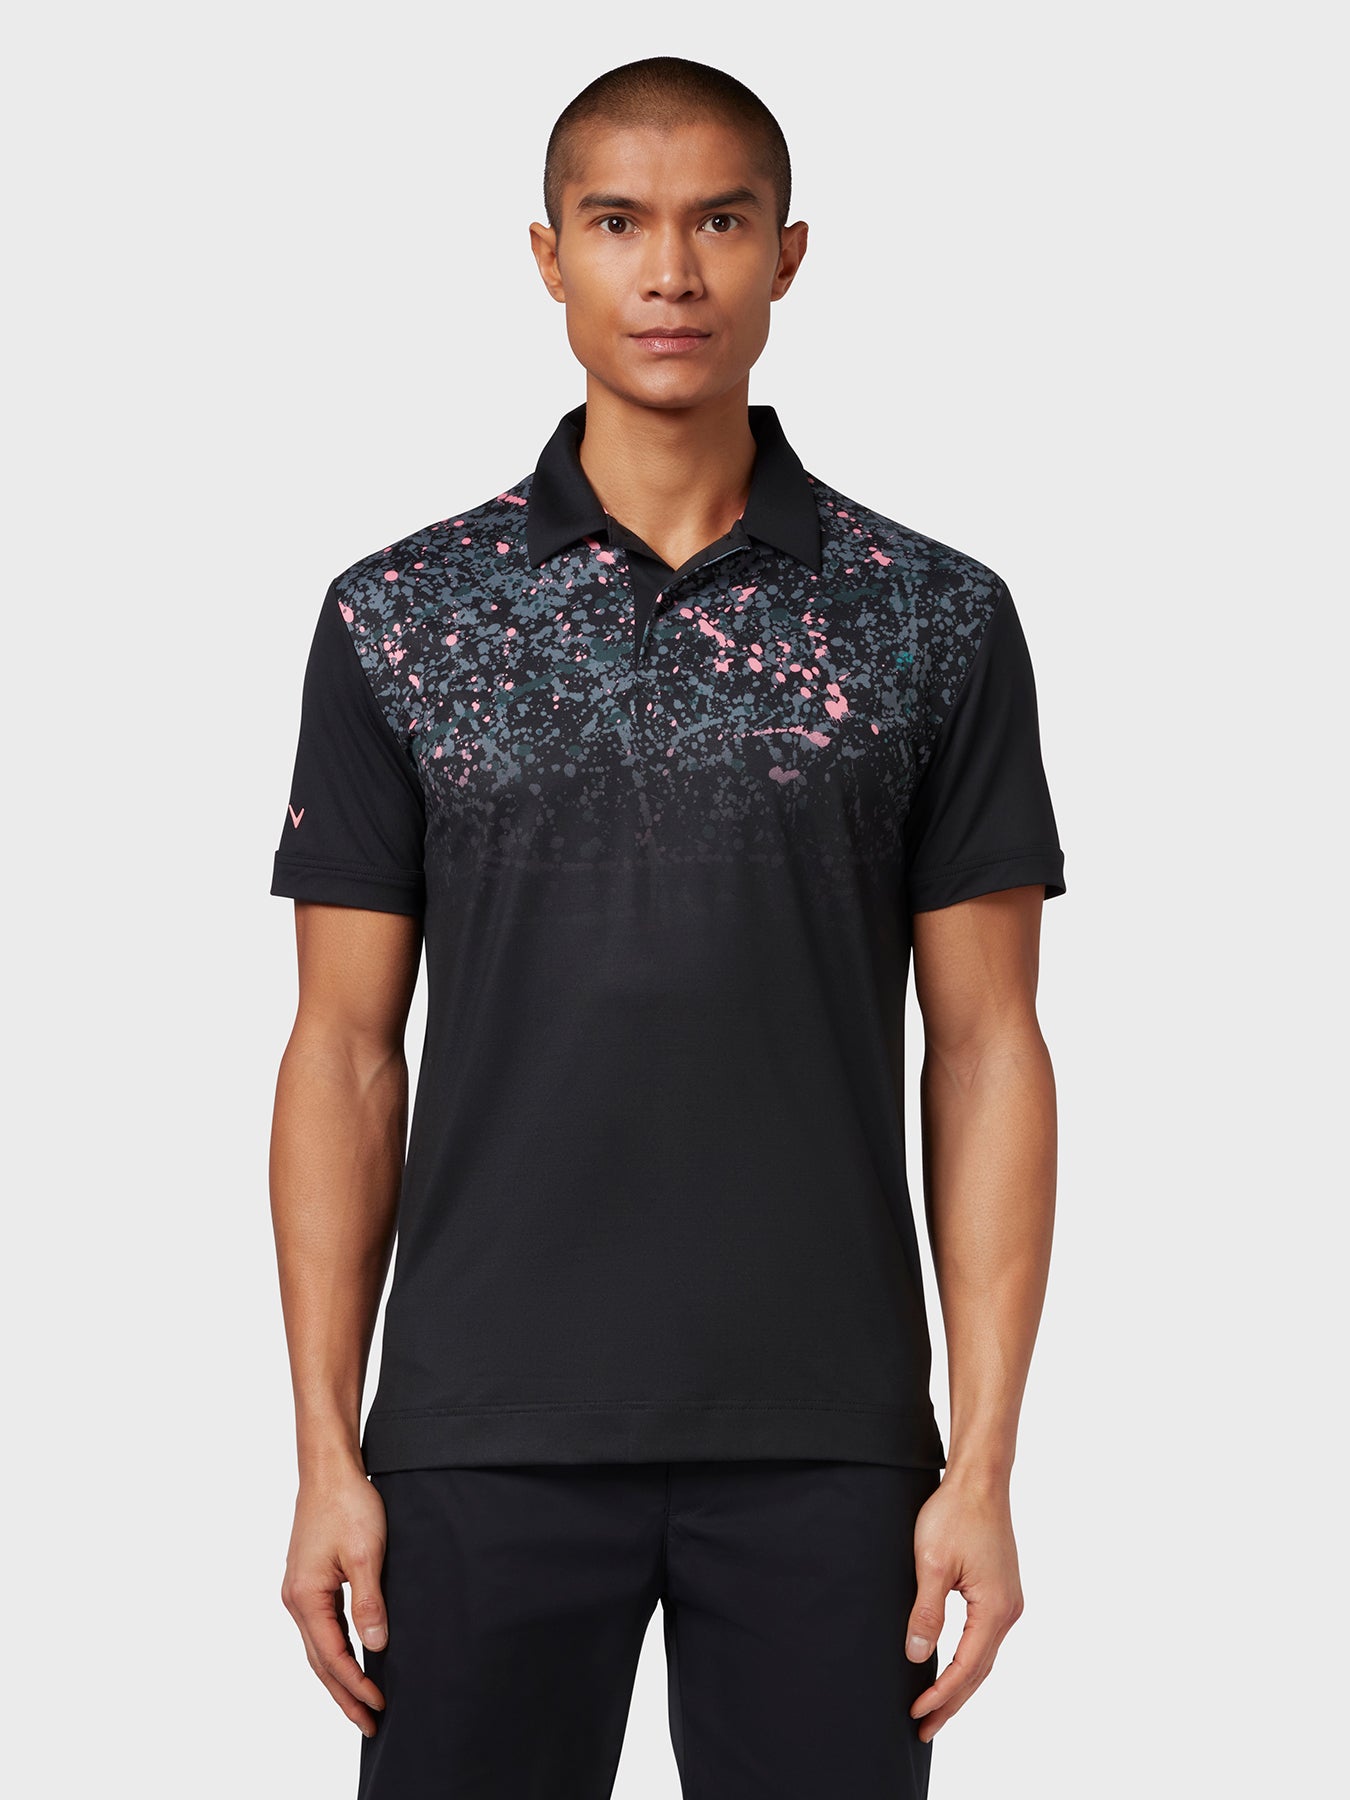 View X Series Splatter Paint Ombre Polo In Caviar Caviar L information